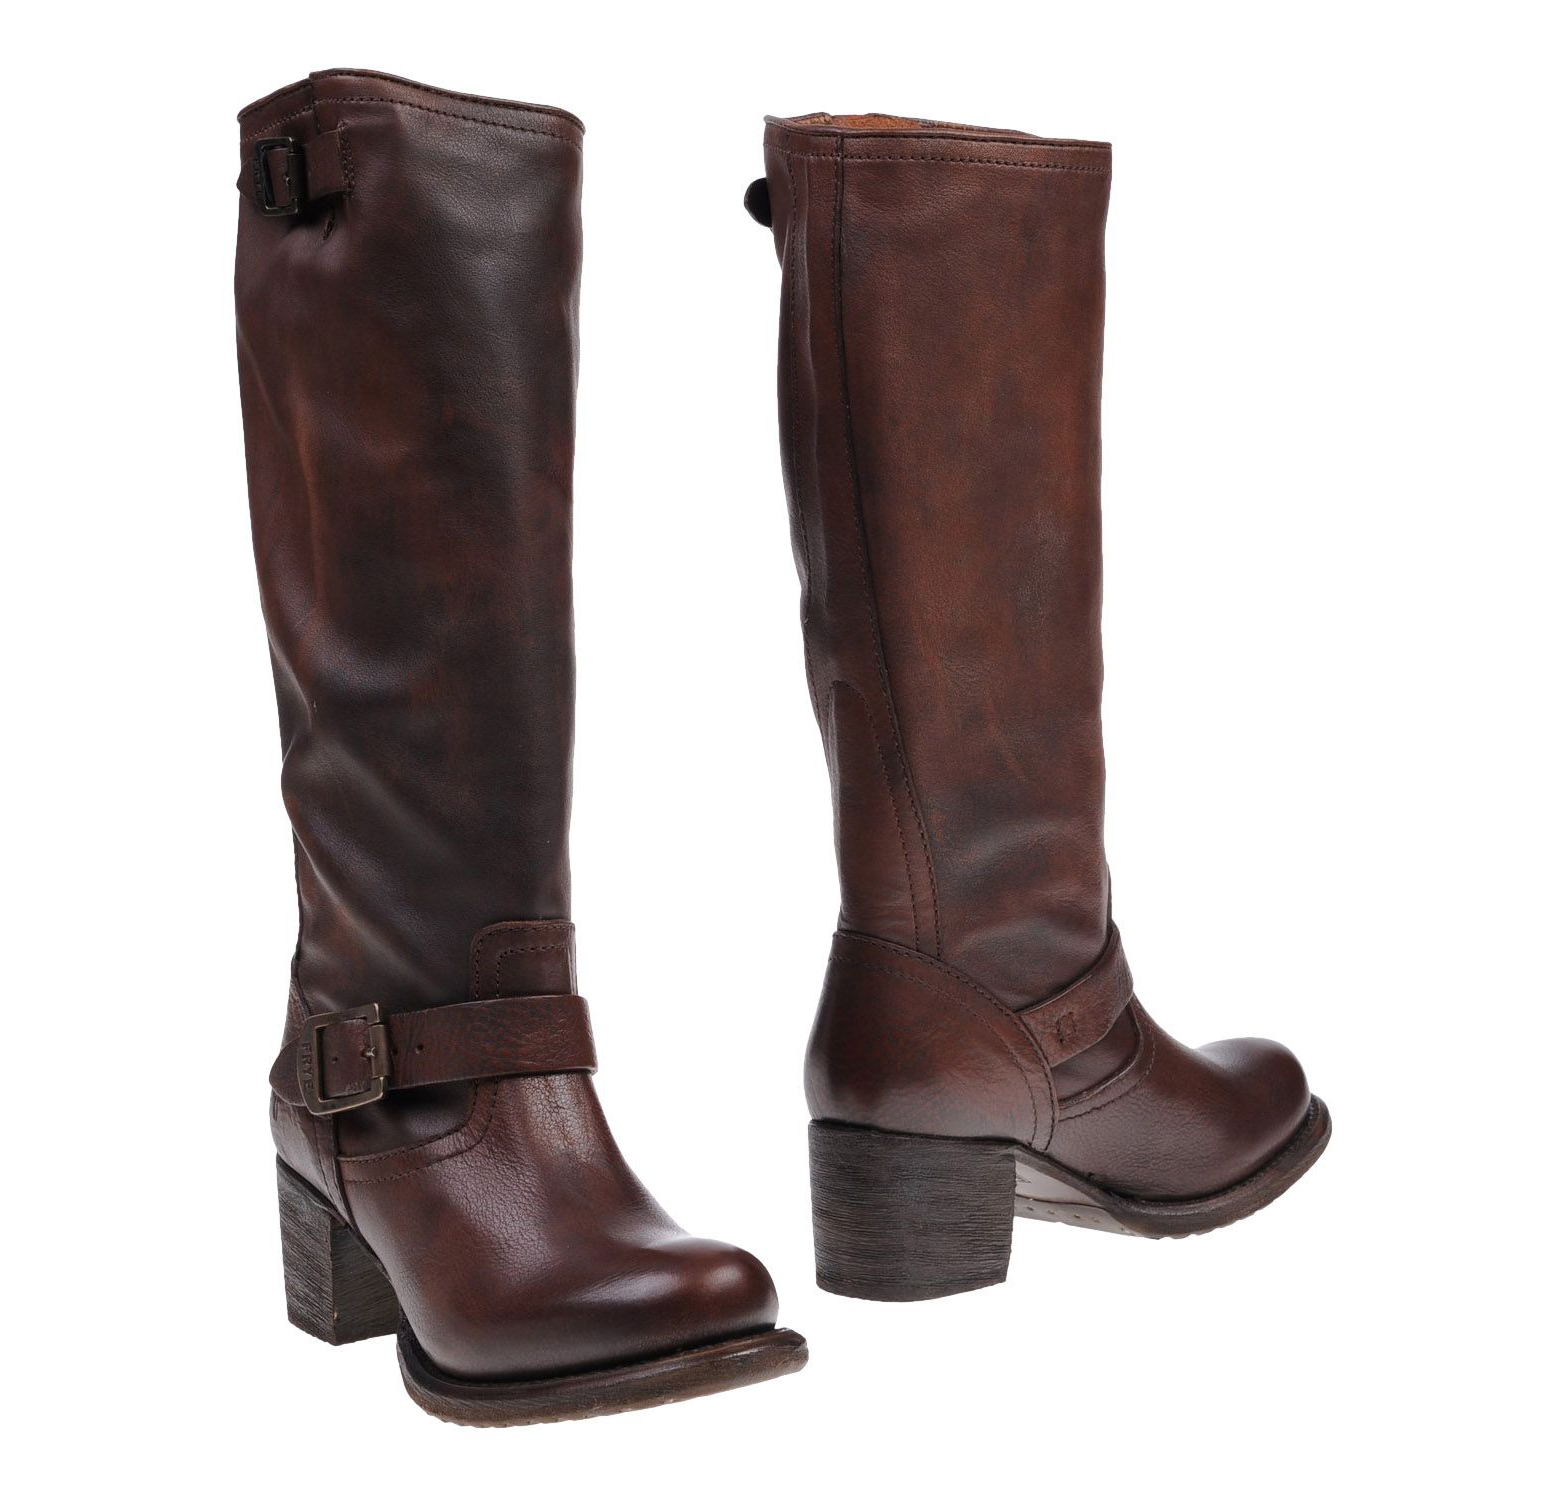 Looks Good from the Back: BUY THIS: More Awesome Frye Boot Deals!